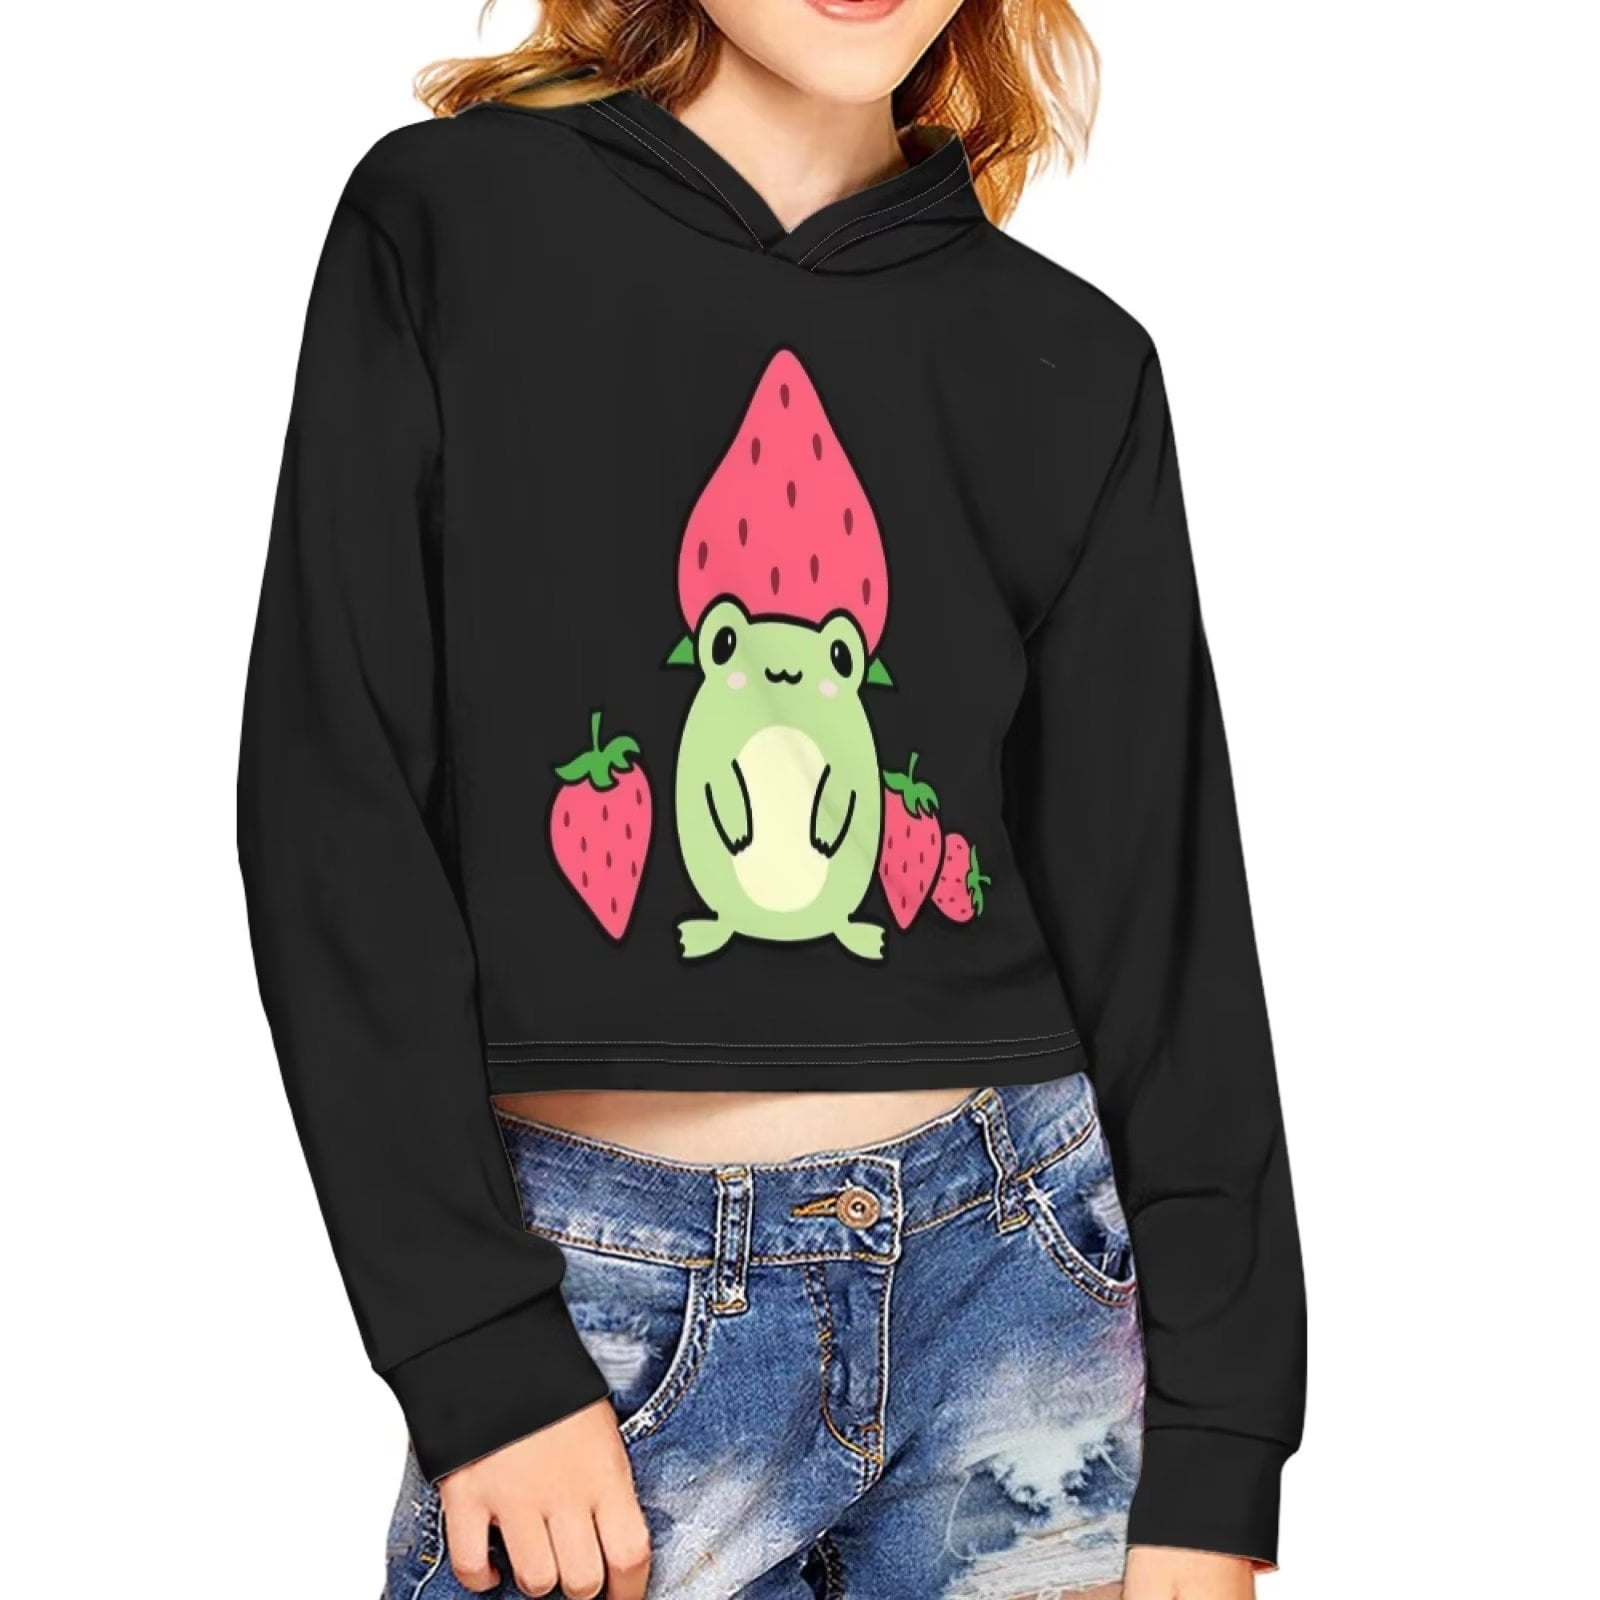 Pzuqiu Frog Strawberry Cute Crop Top Hoodies for Teen Girls Athletic  Clothing Jumpers Yoga Sweatshirt,13Y-14Y Comfy Drop Shoulder Shirt Casual  Preppy Sportswear Fit for Spring/Fall Outdoor Outfits 